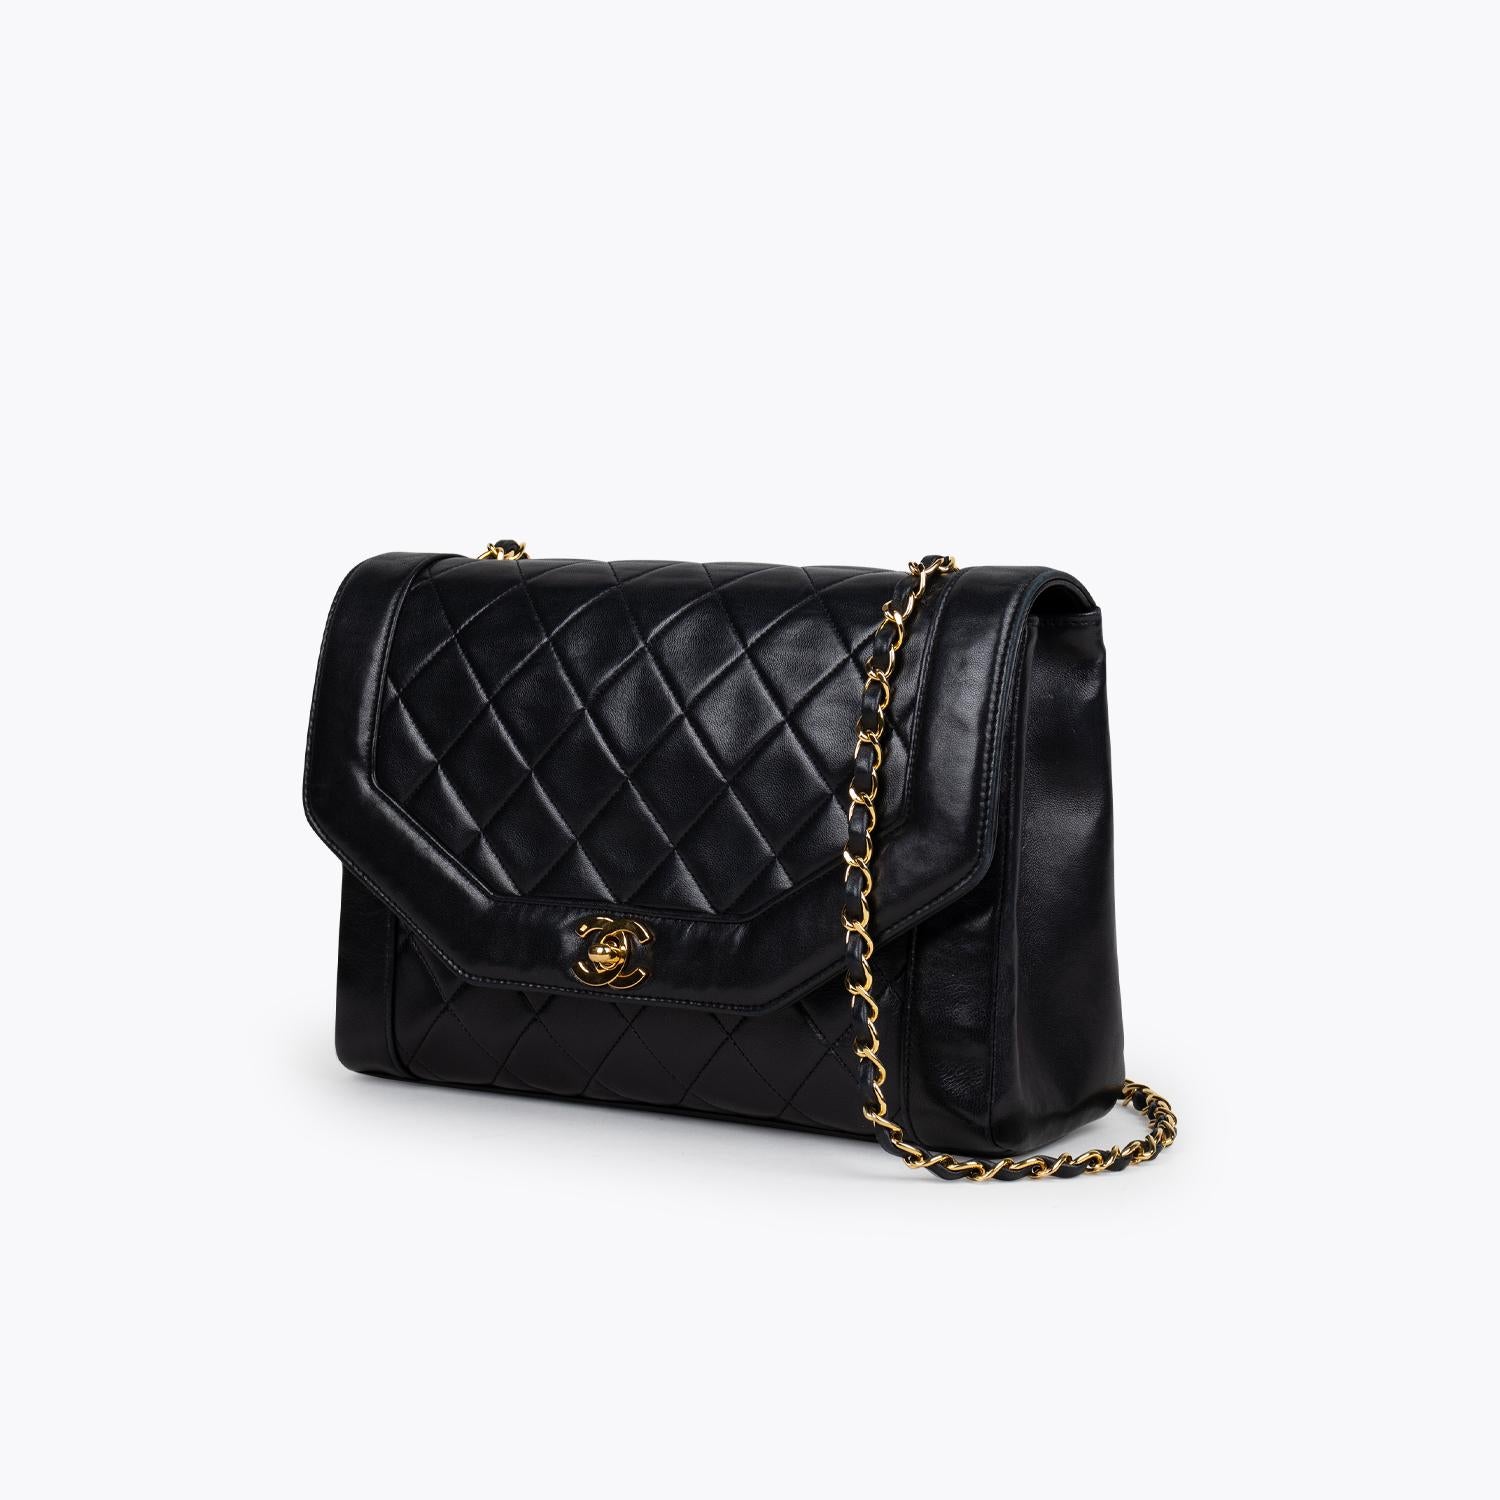 Black quilted calfskin Chanel Large Diana Flap bag with

– Gold-tone hardware
– Single chain-link and leather shoulder strap
– Burgundy leather interior, dual interior pockets; one with zip closure and interlocking CC turn-lock closure at front